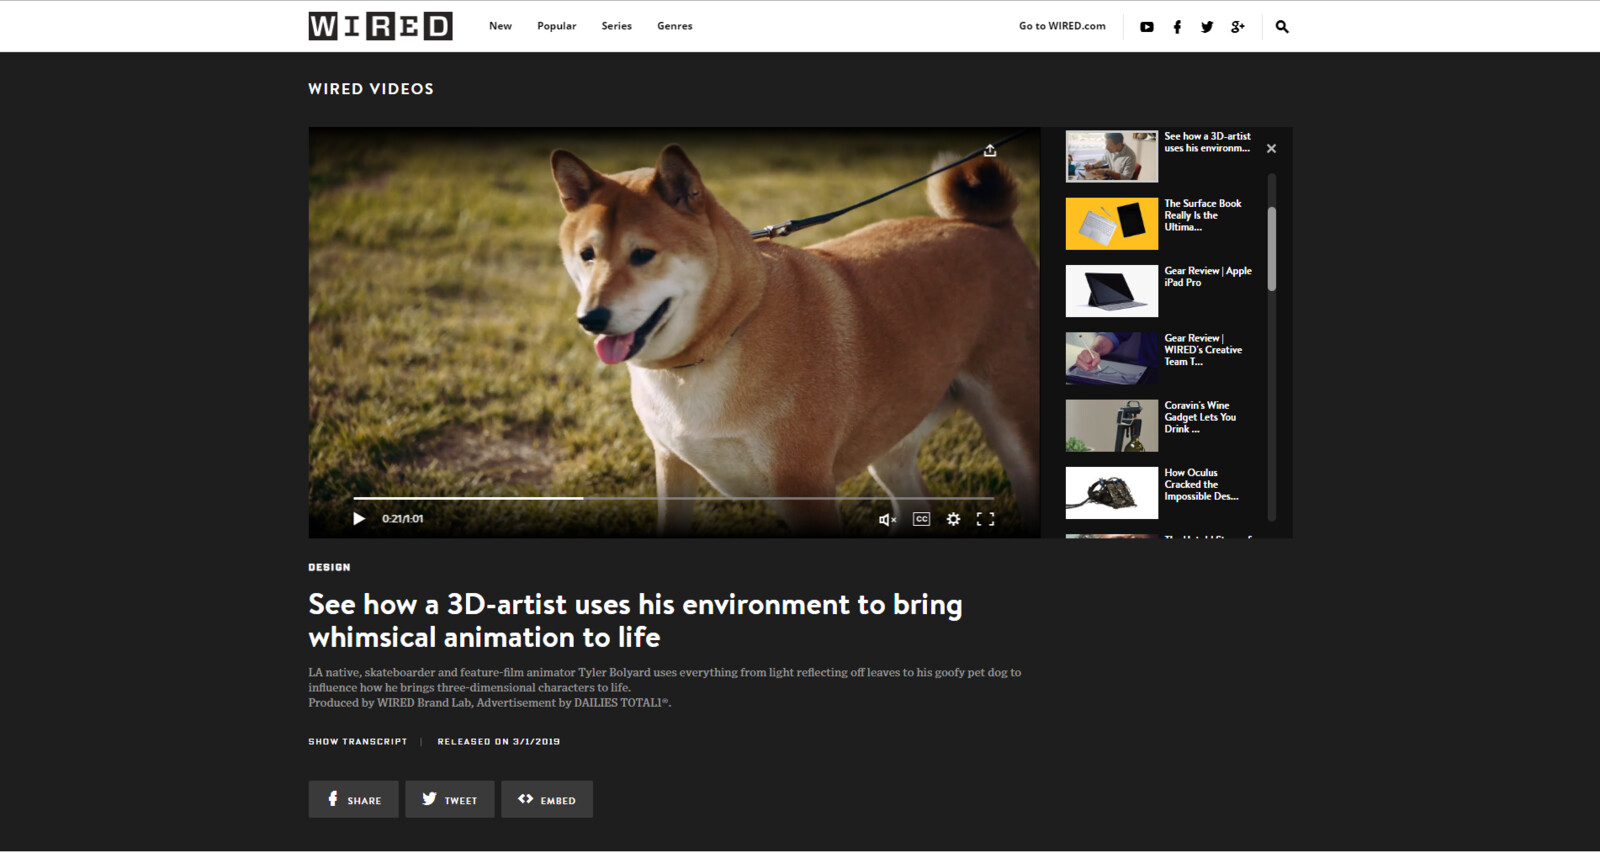 WIRED Web Feature